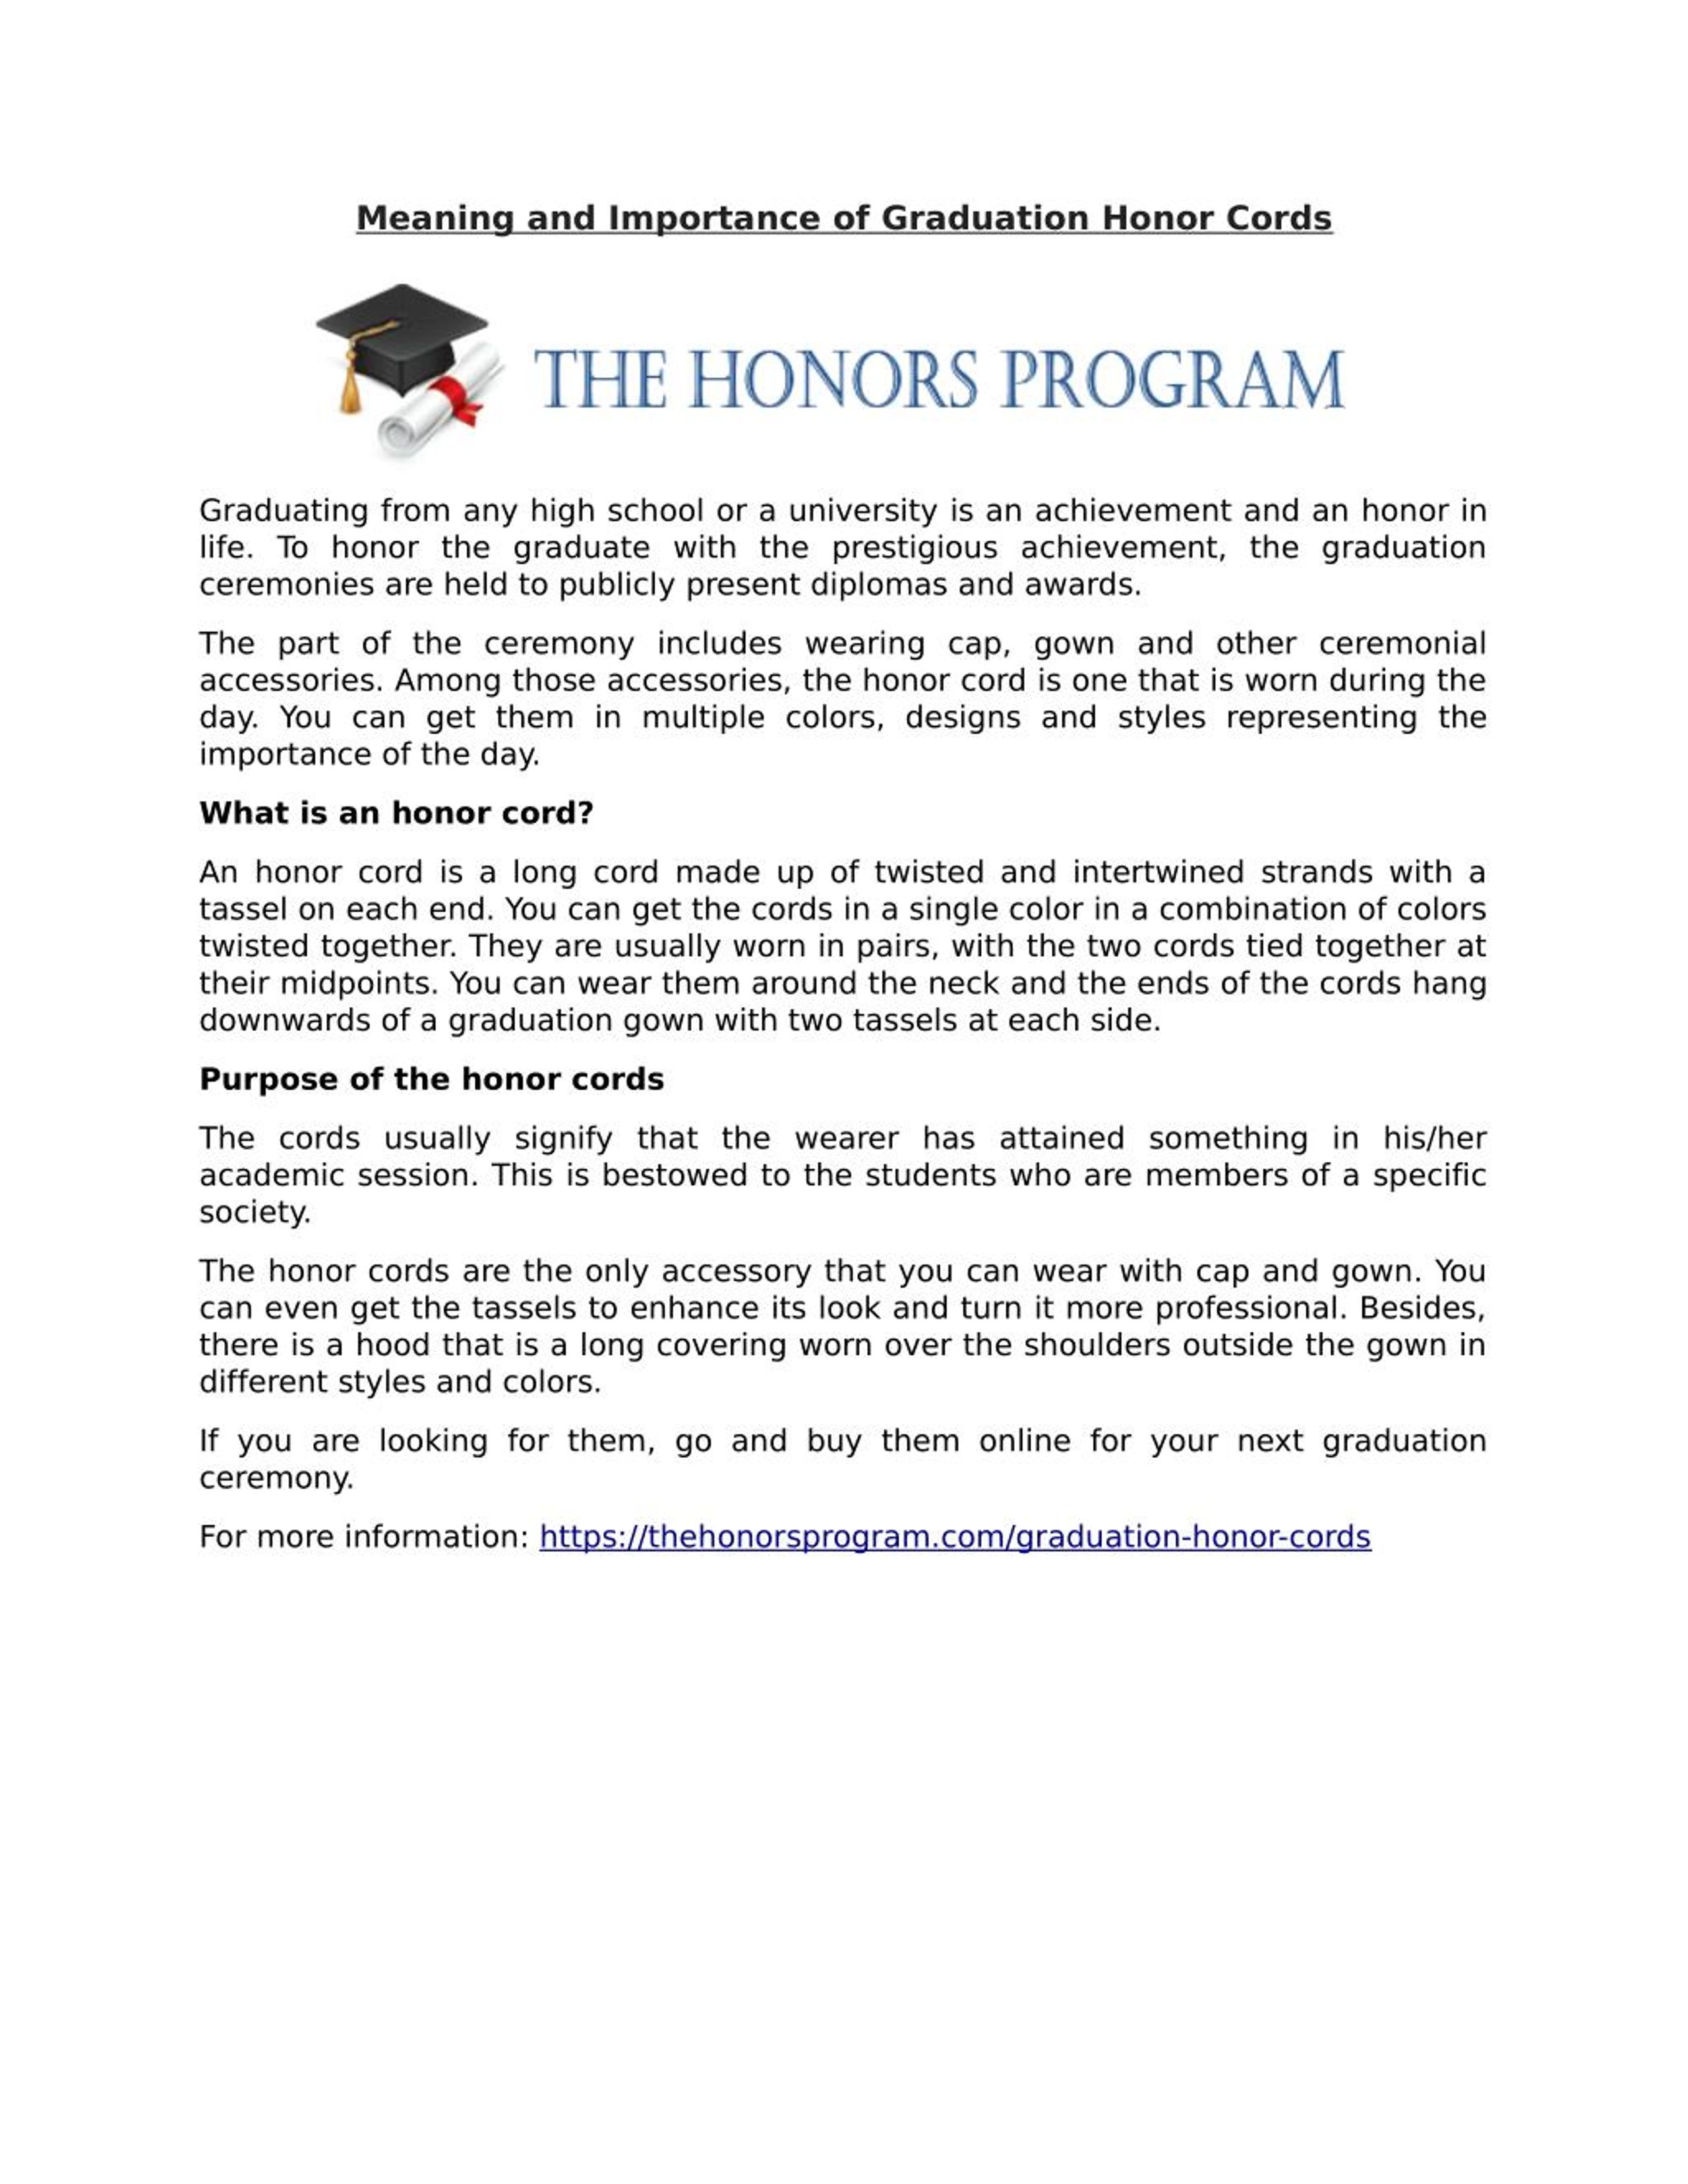 PPT - Meaning and Importance of Graduation Honor Cords PowerPoint  Presentation - ID:7178762